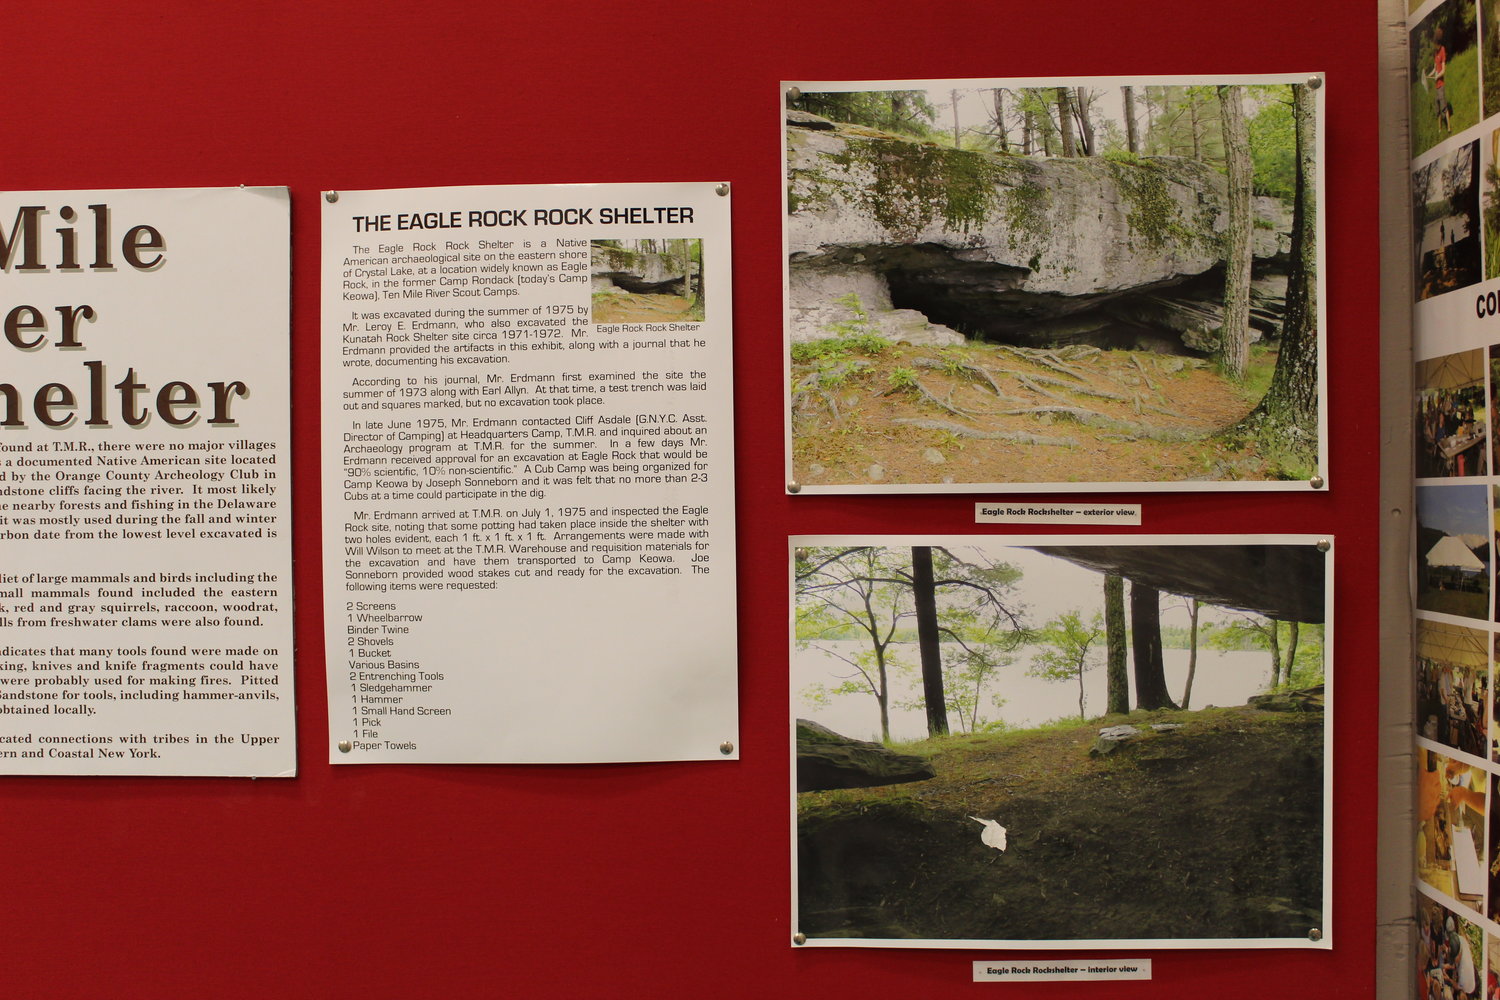 An exhibit about the Eagle Rock shelter, which is located near Ten Mile River.